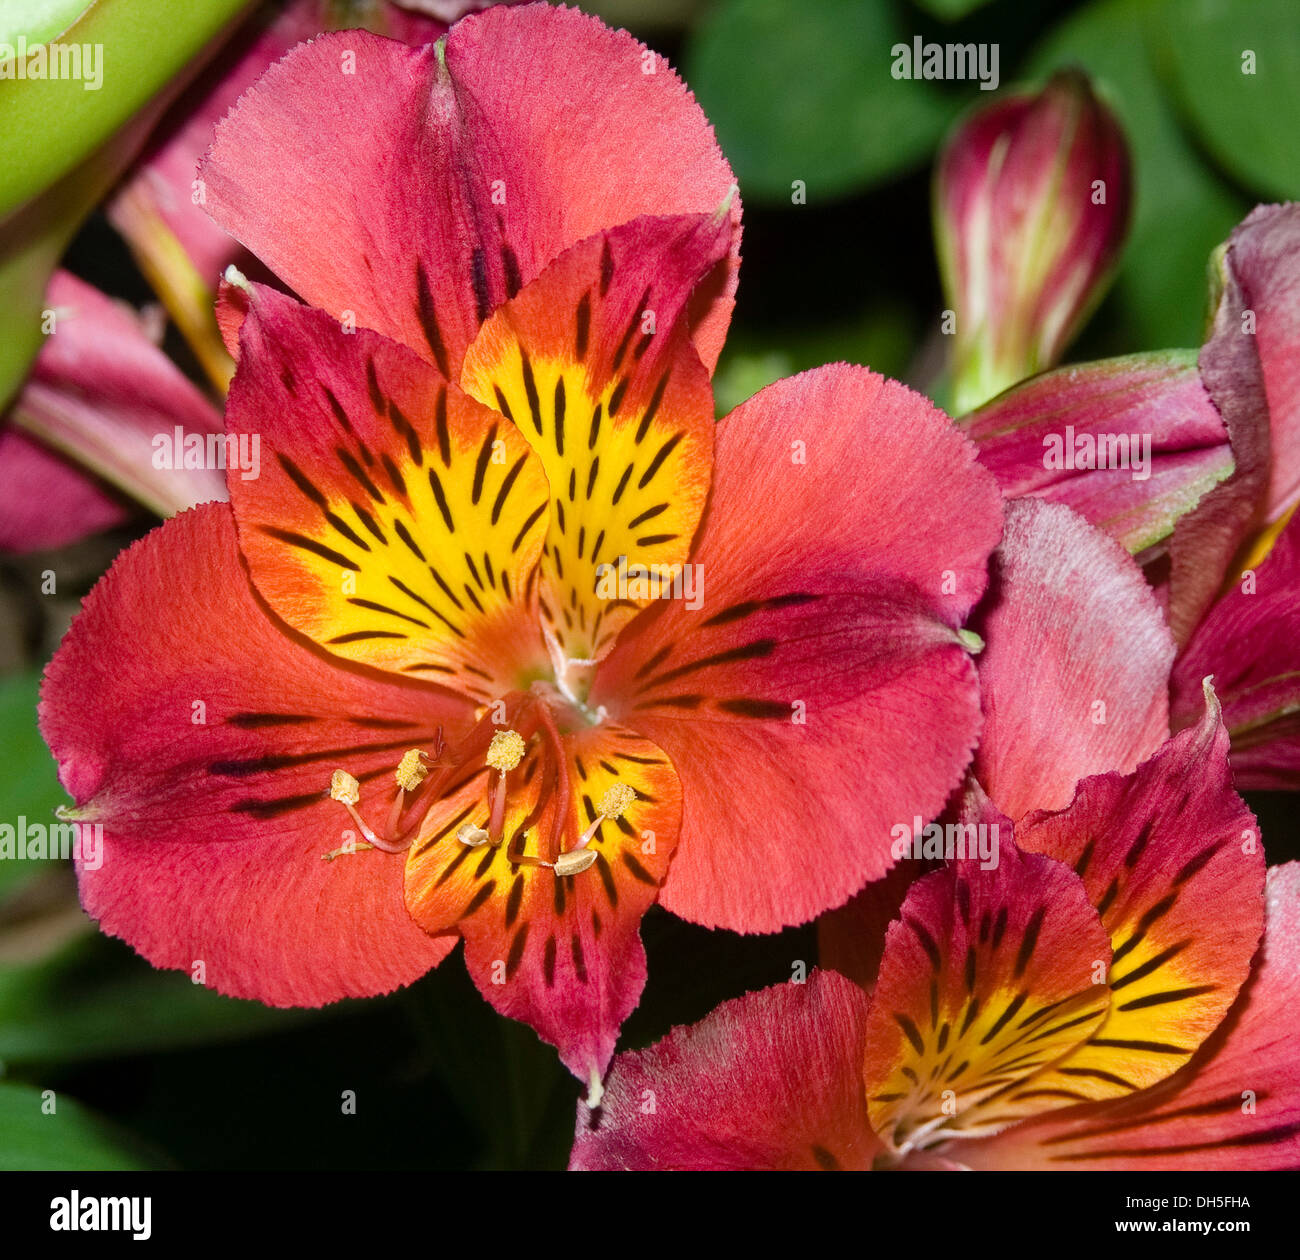 Vivid orange / red flower with bright yellow speckled throat, Alstroemeria - Peruvian / Princess lily Stock Photo